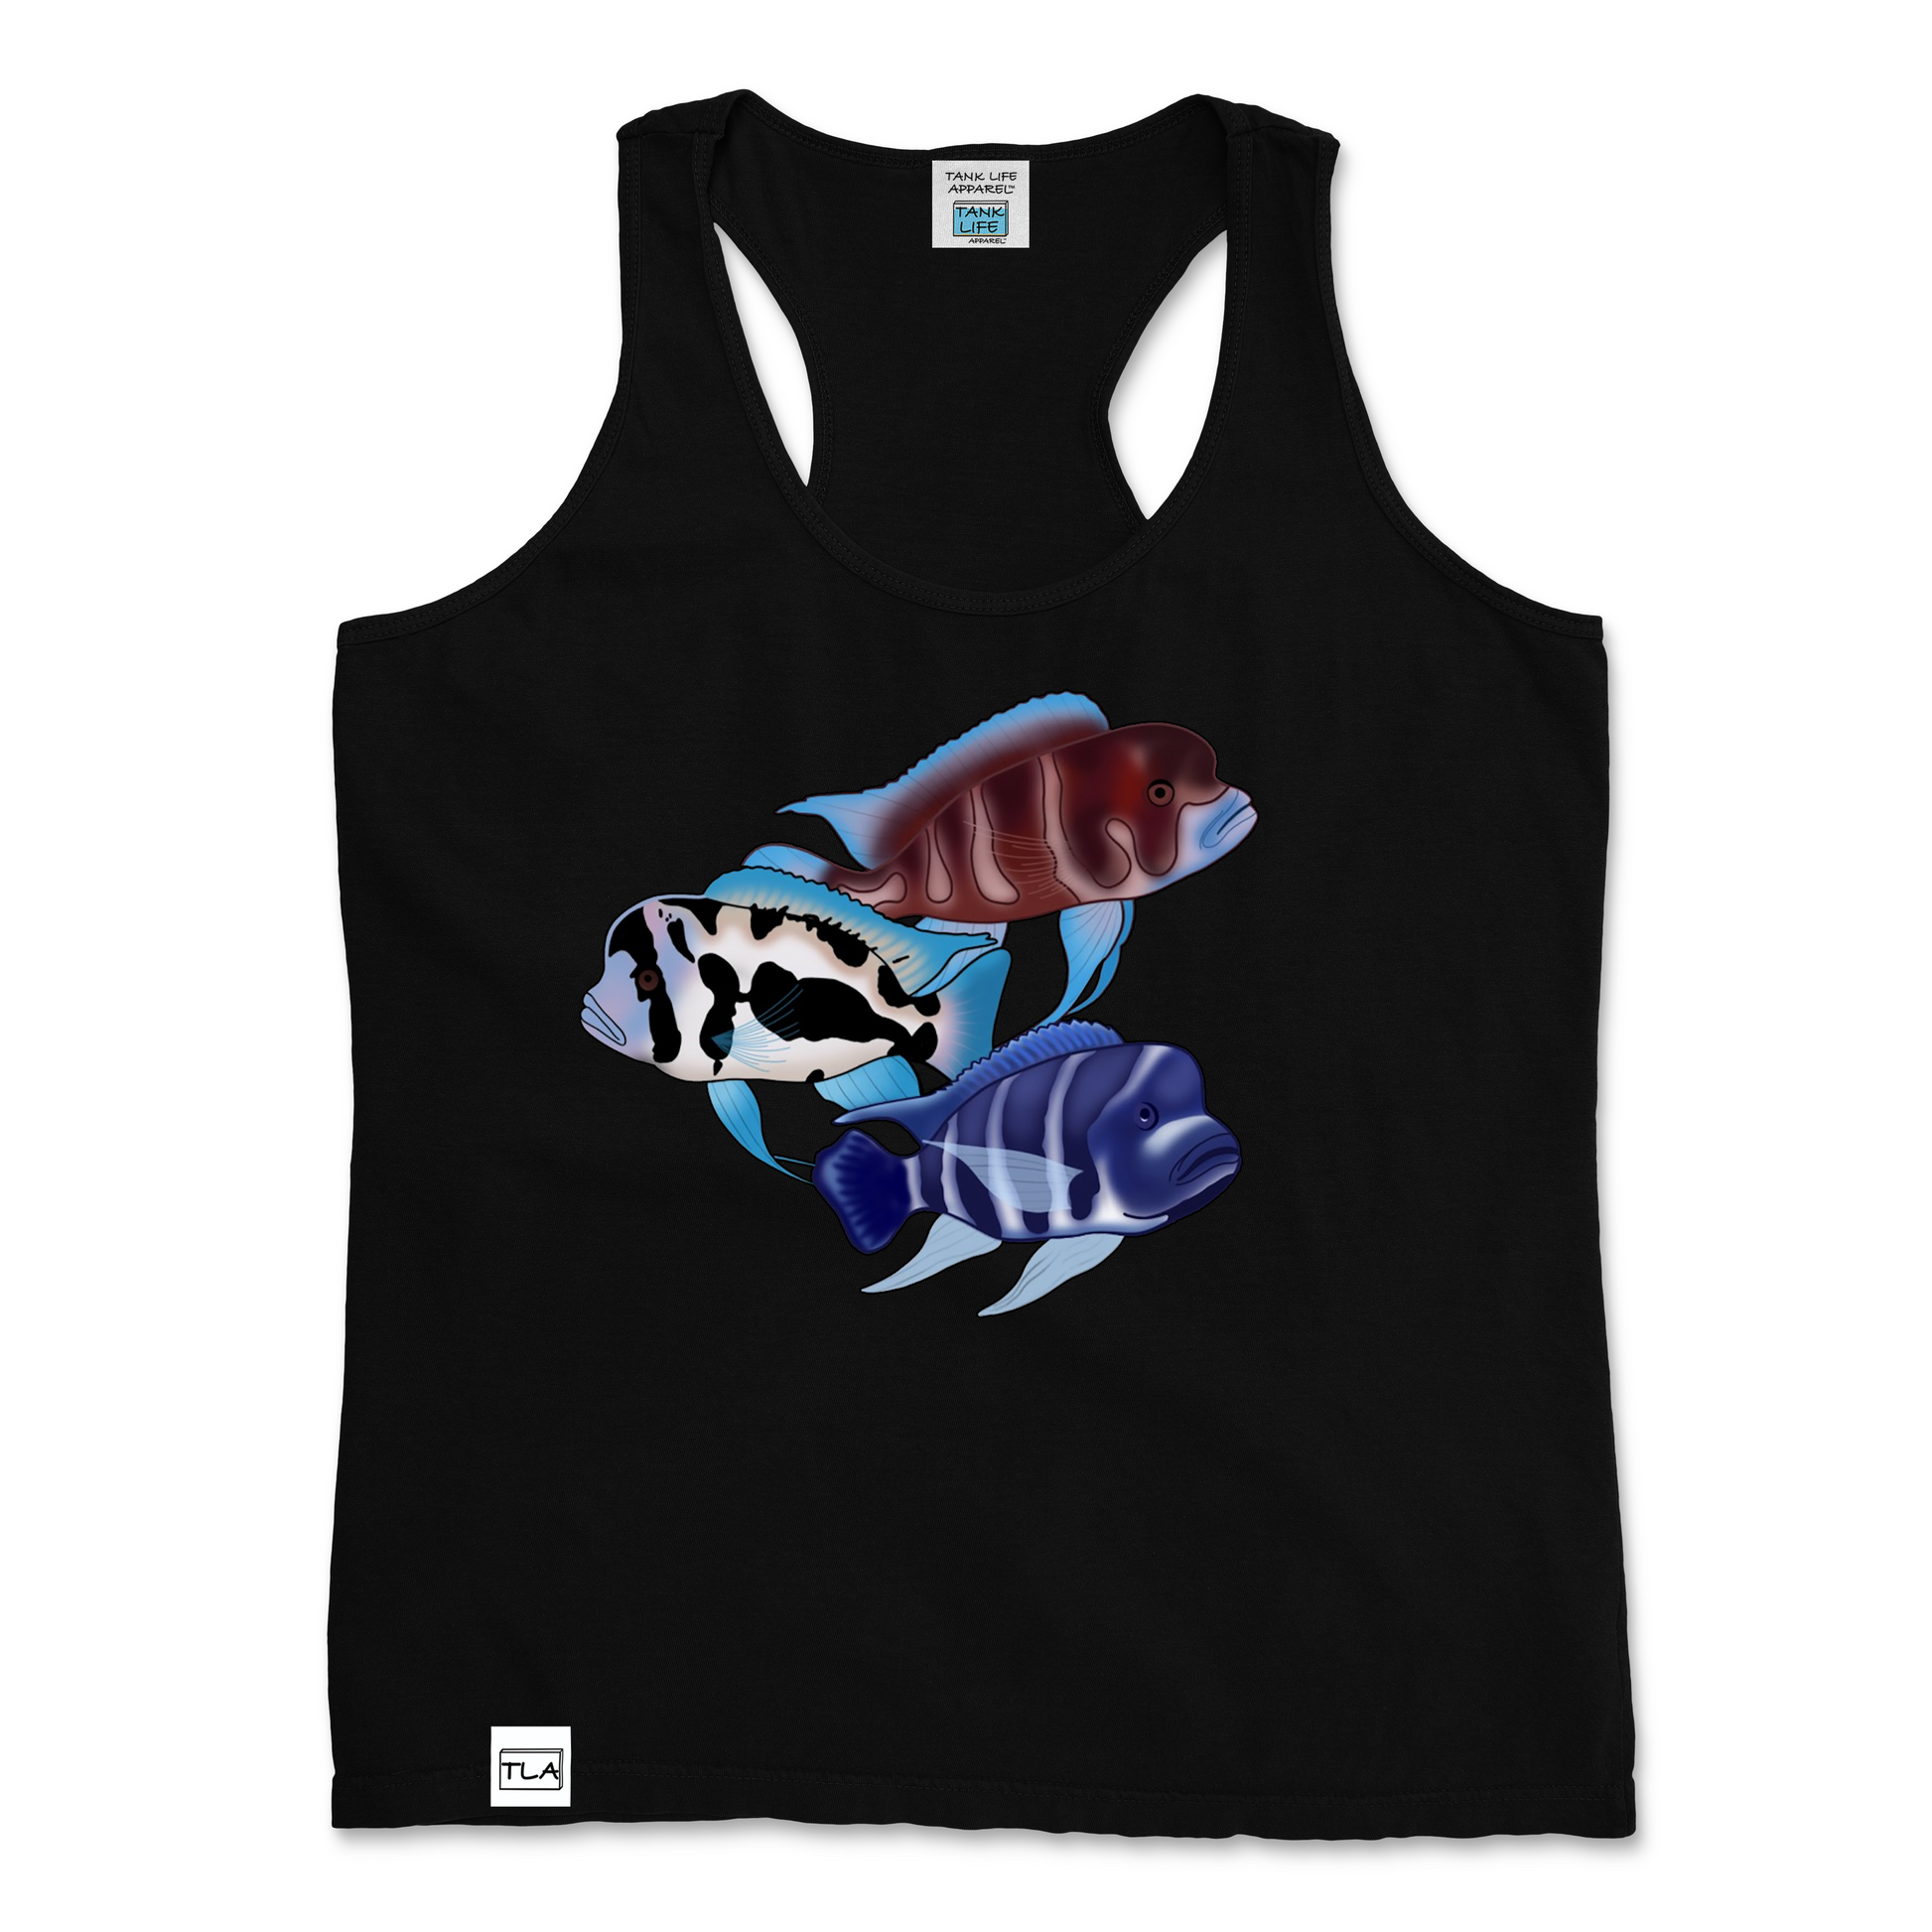 The Tank Life Apparel frontosa cichlid design on a stylish women's tank top with our custom TLA hem label. Three fish Black widow, red frontosa, blue zaire. Blue fish with dark stripes.